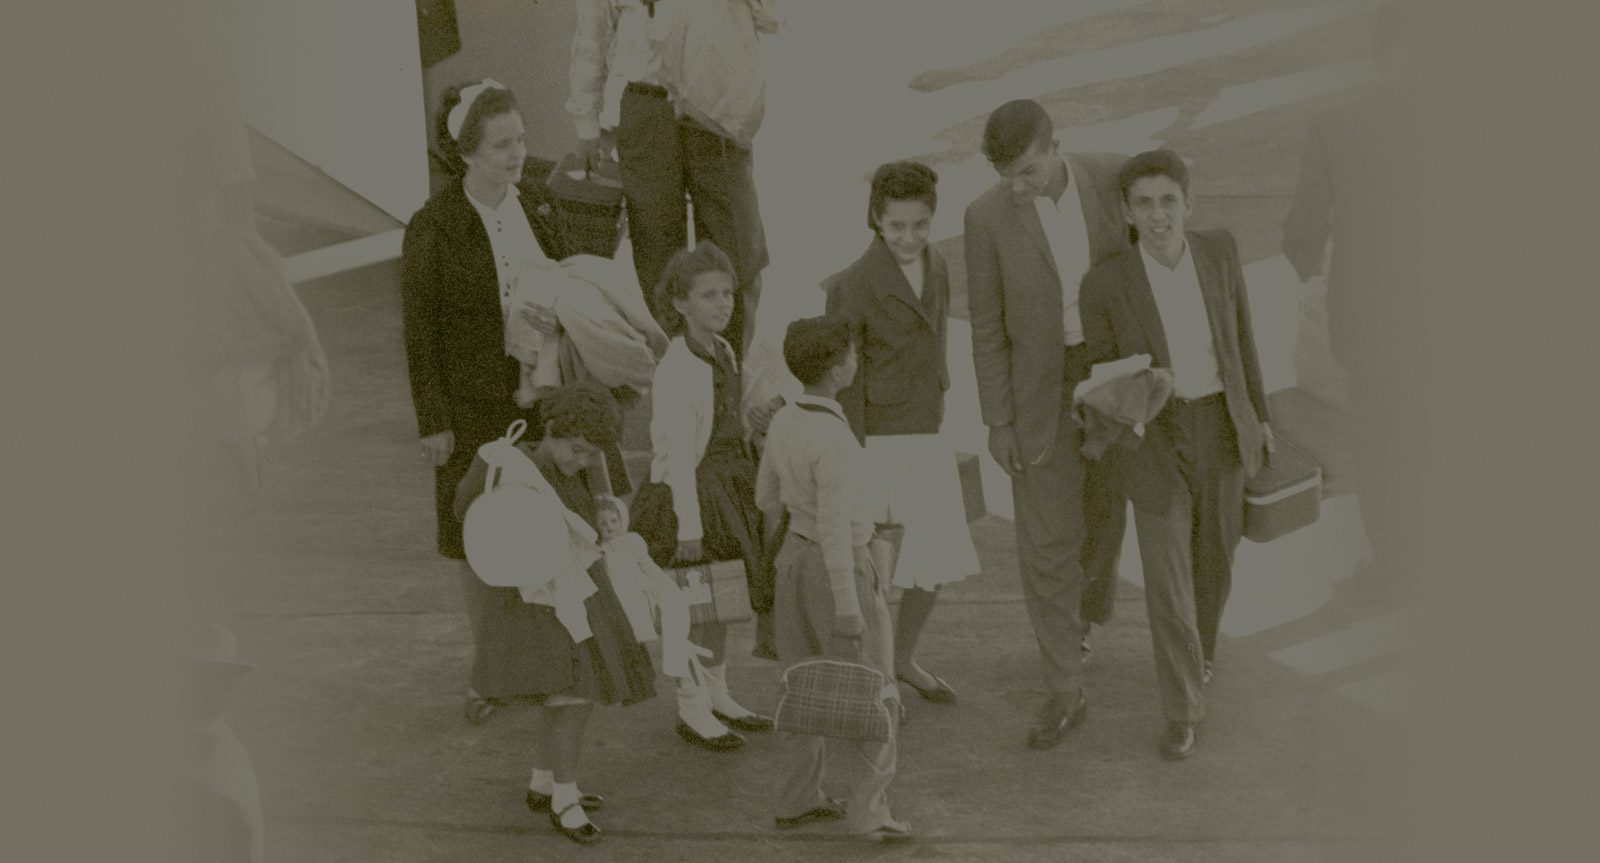 Background photo from the early 1960s with children carrying small luggage